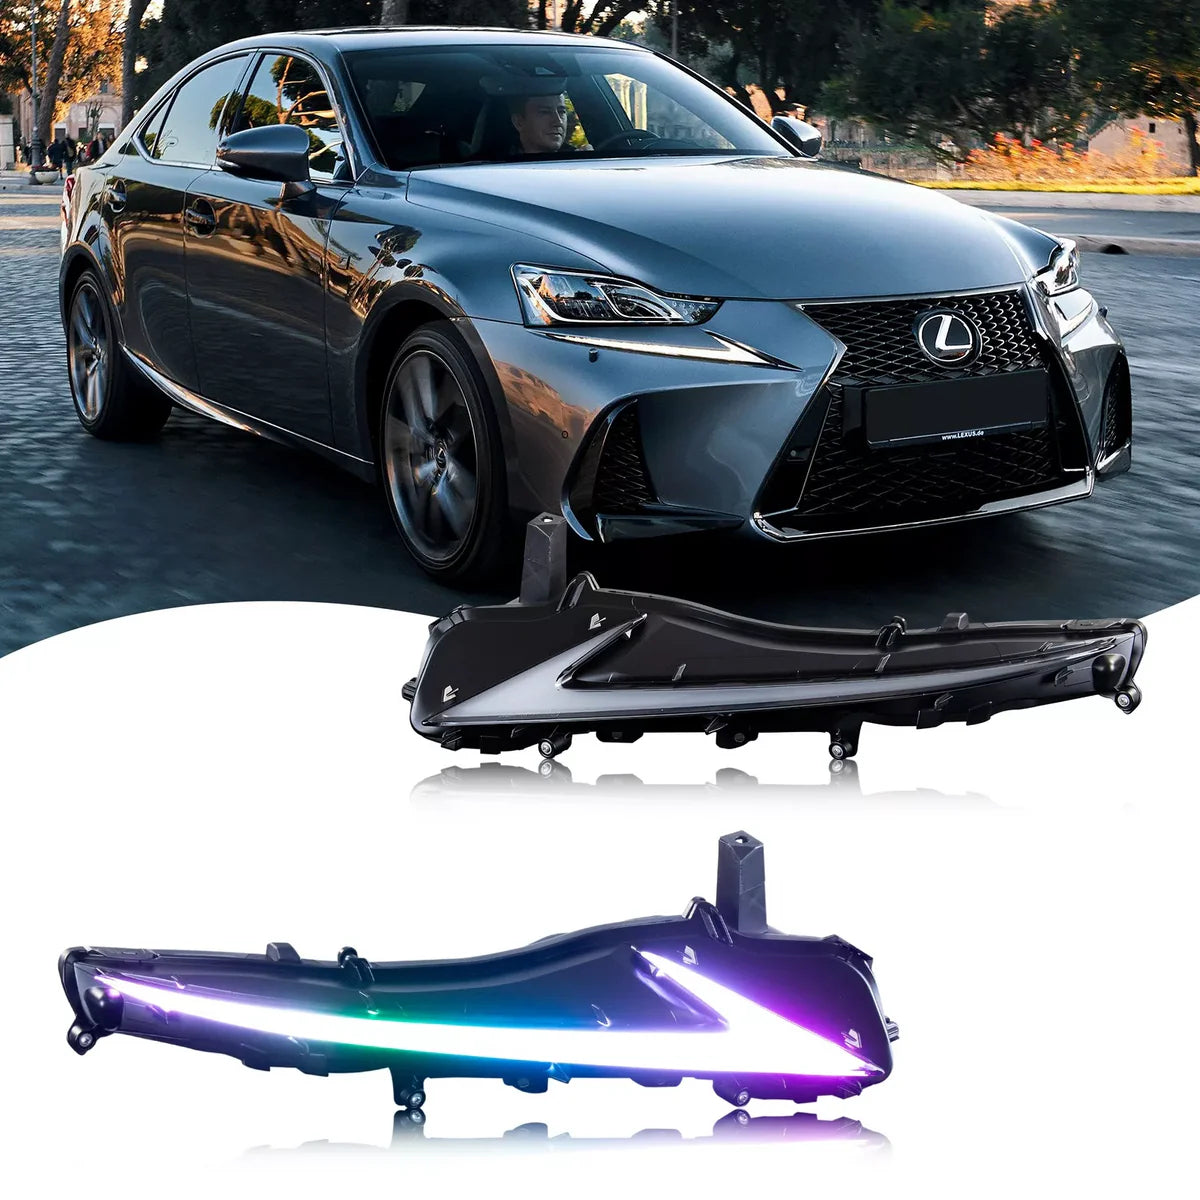 Letsdate RGB Daytime Running Light for 2014-2020 Lexus IS250 IS350 IS200t IS300 W/Start up Animation With Sequential Turn Signal